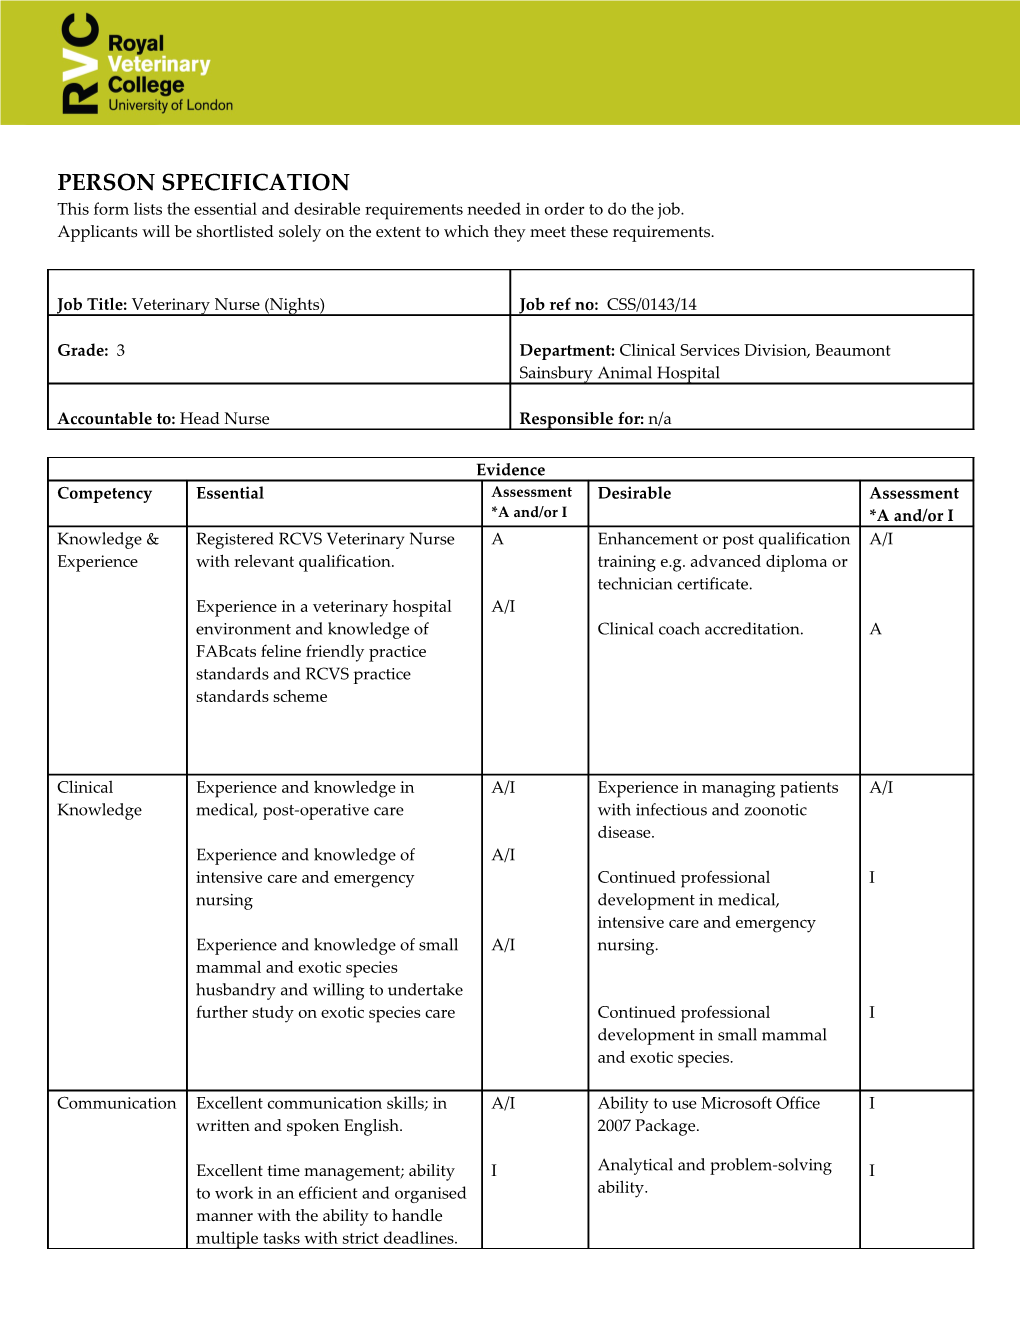 Person Specification s27